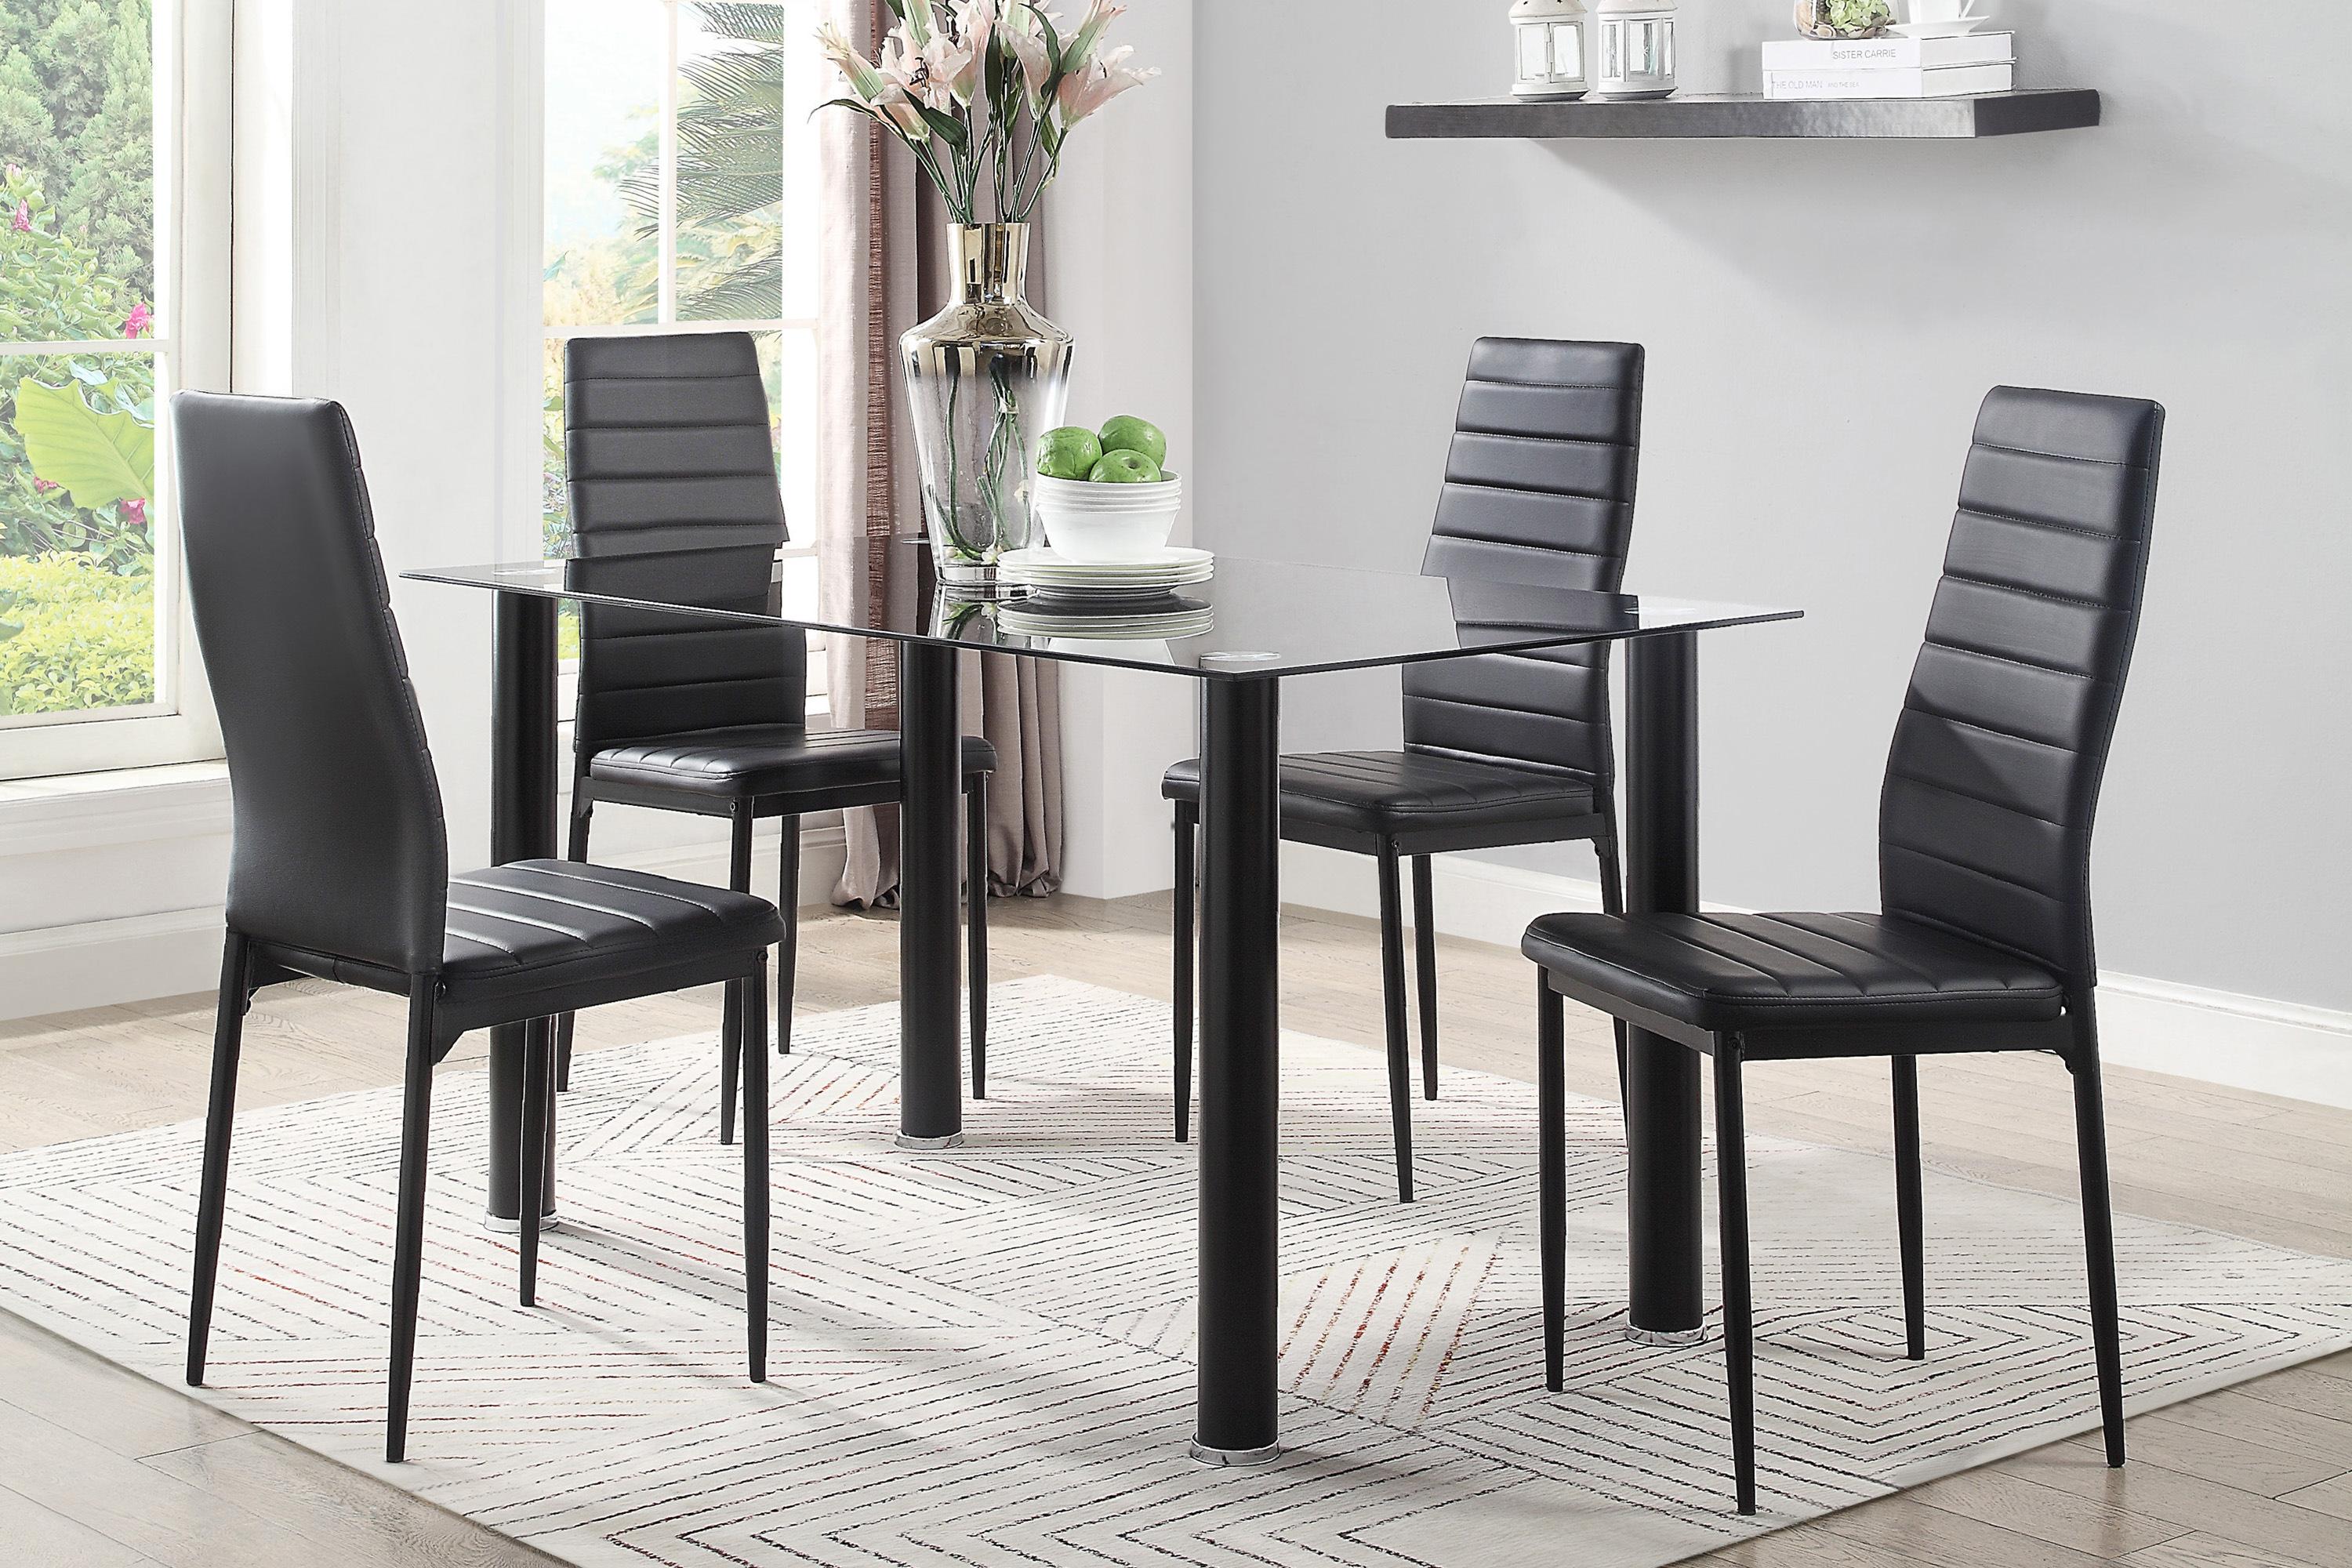 Contemporary Dining Room Set 5538BK*5PC Florian 5538BK*5PC in Black Faux Leather